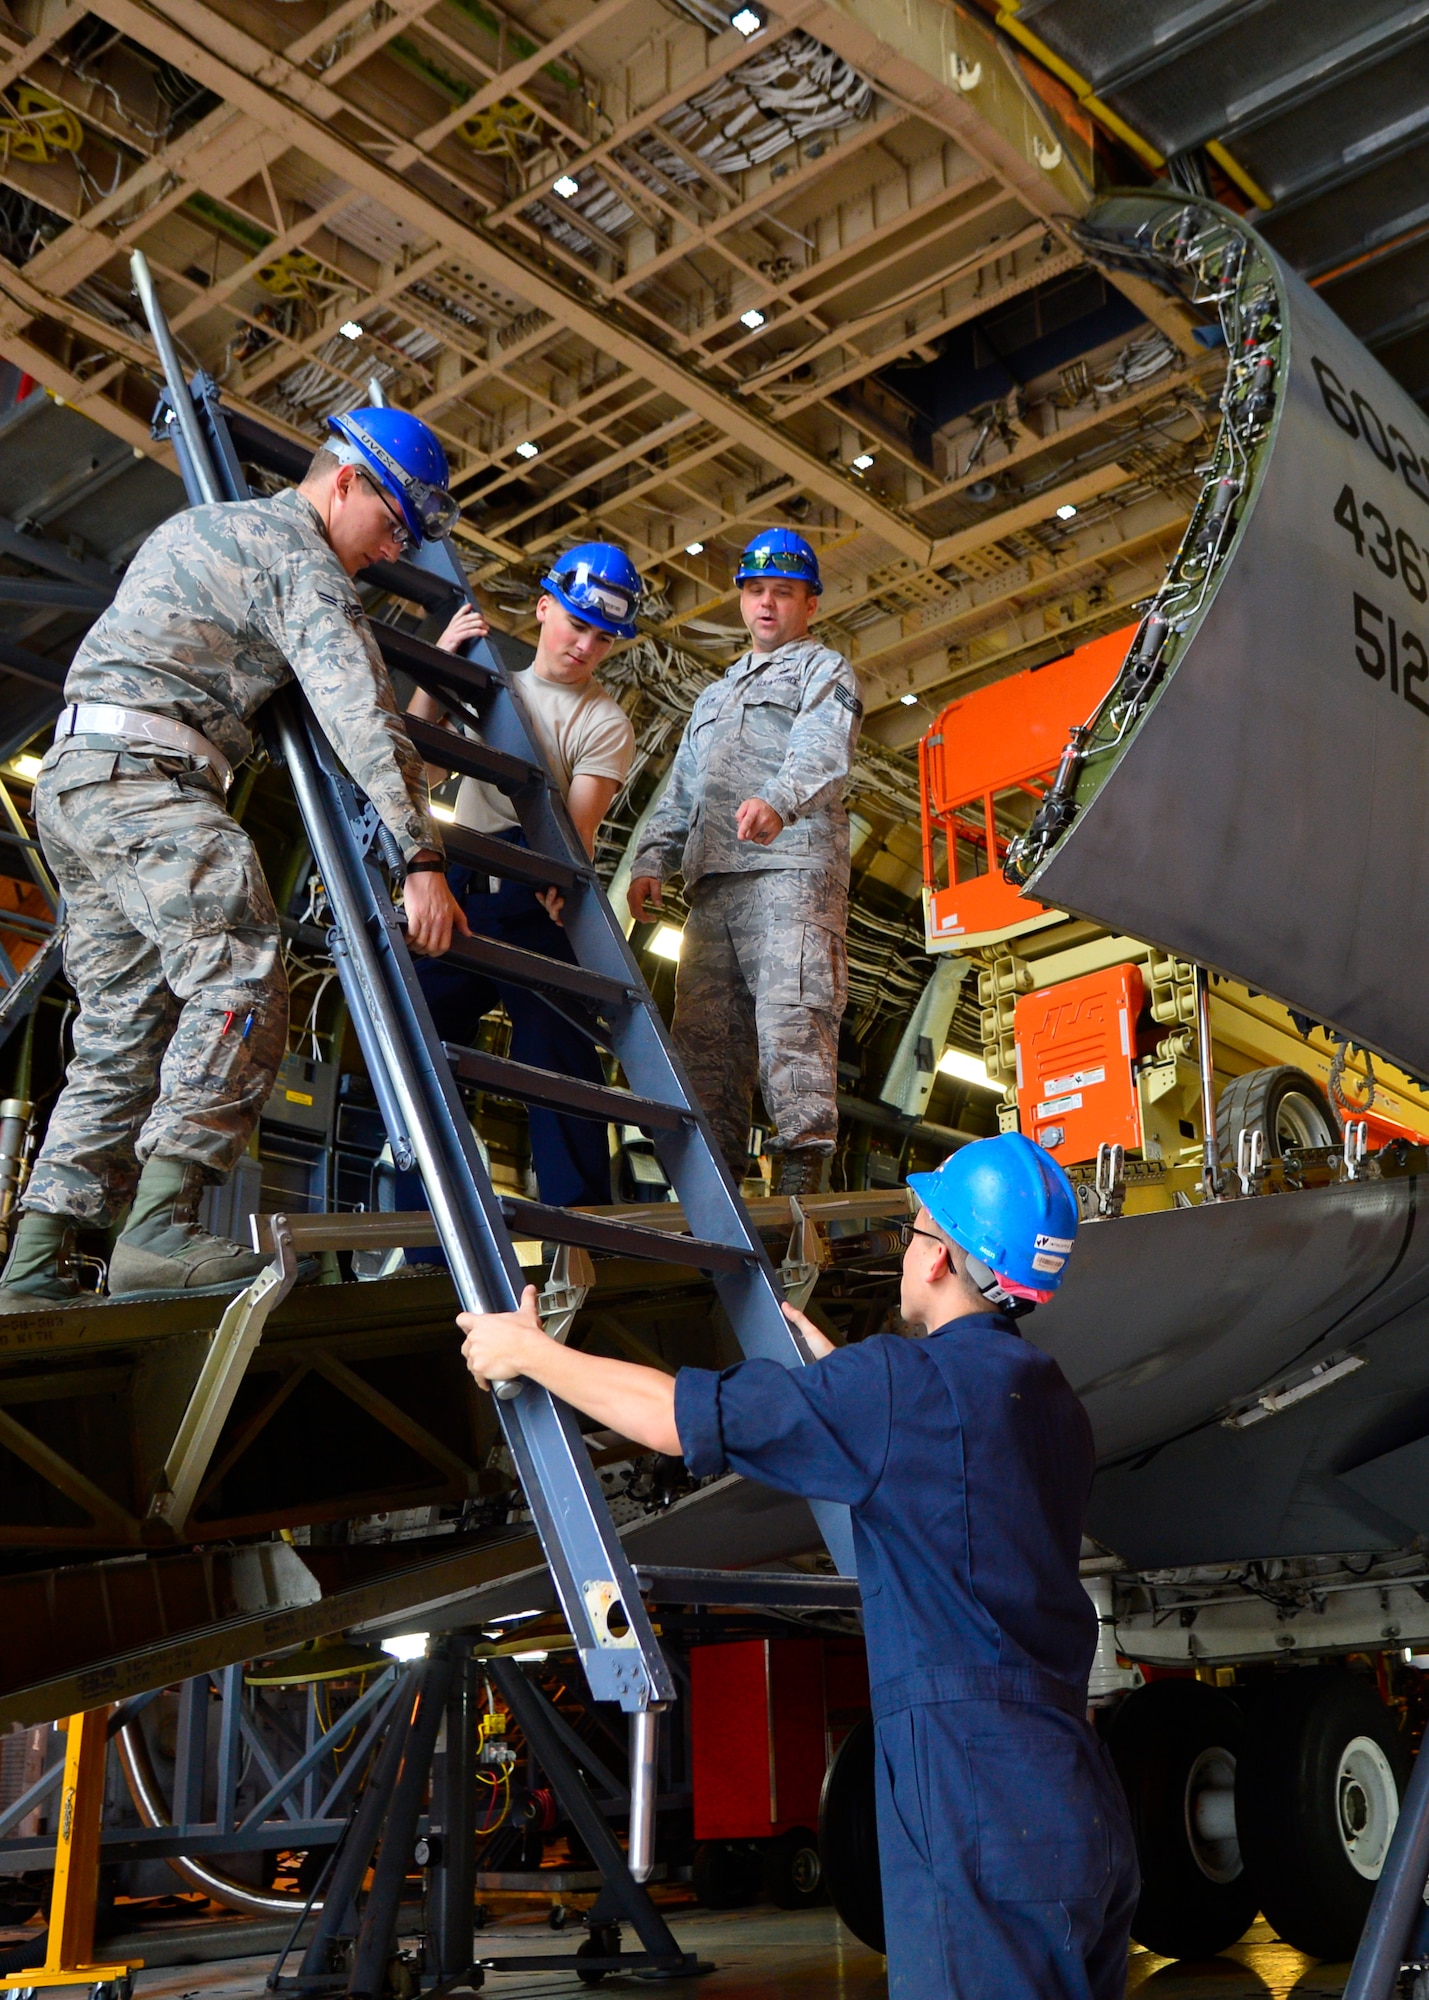 Tech. Sgt. Kevin Taylor, 436th Maintenance Squadron isochronal dock floor chief, oversees as Airmen remove the flight deck access ladder from a C-5M Super Galaxy during a Maintenance Steering Group-3 Major inspection Dec. 2, 2015, at Dover Air Force Base, Del. The ladder was being removed so maintainers could make repairs to the ladder’s guide tracks. (U.S. Air Force photo/Senior Airman William Johnson)